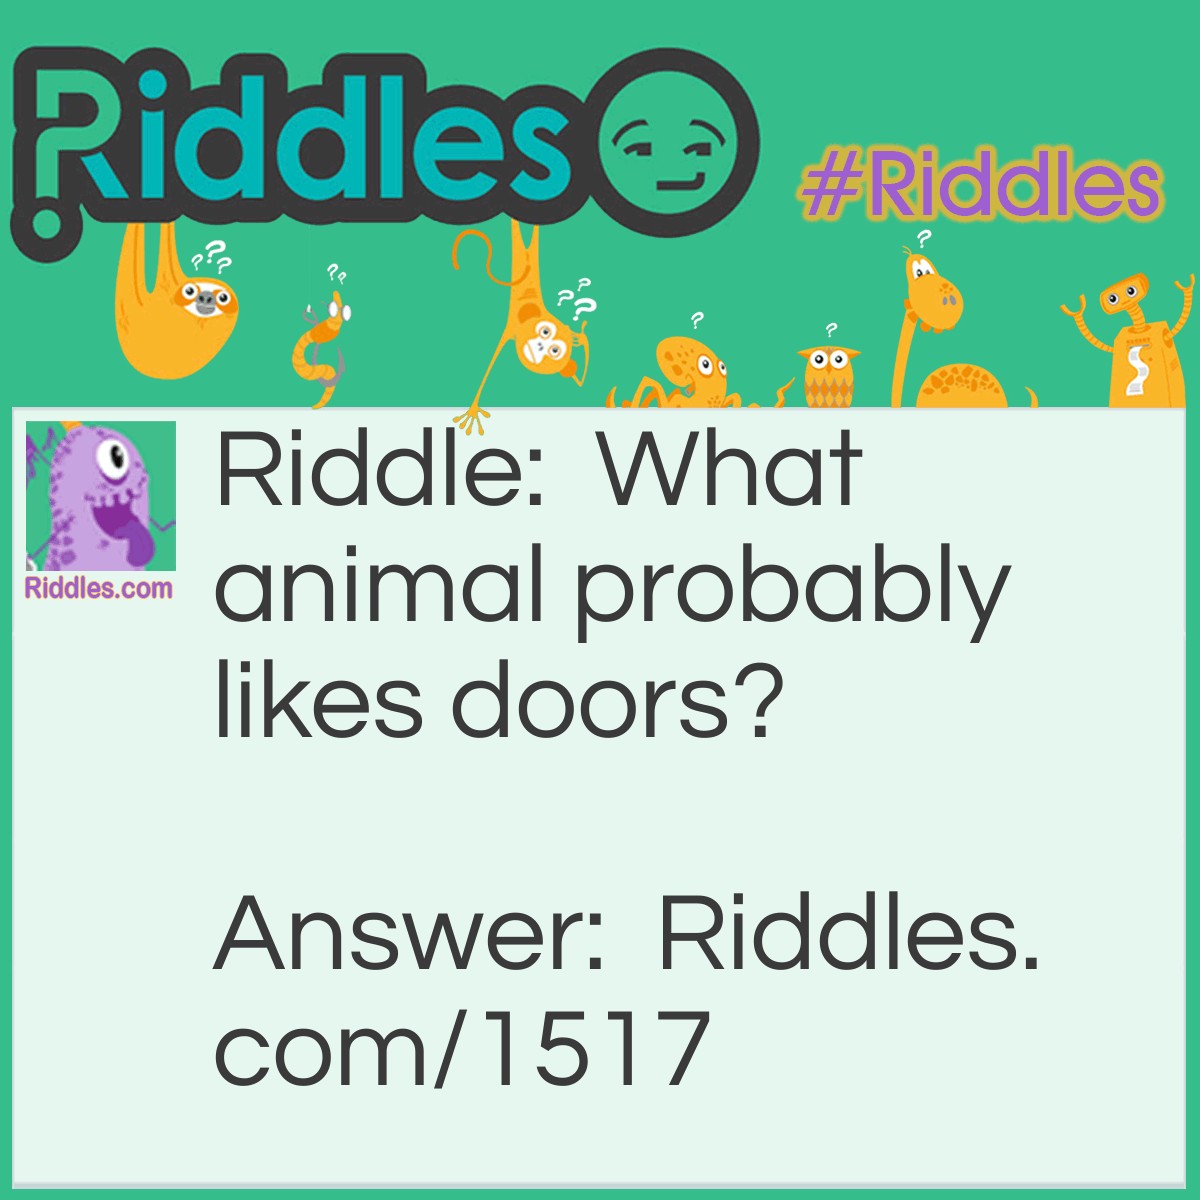 Riddle: What animal probably likes doors? Answer: A doormouse.